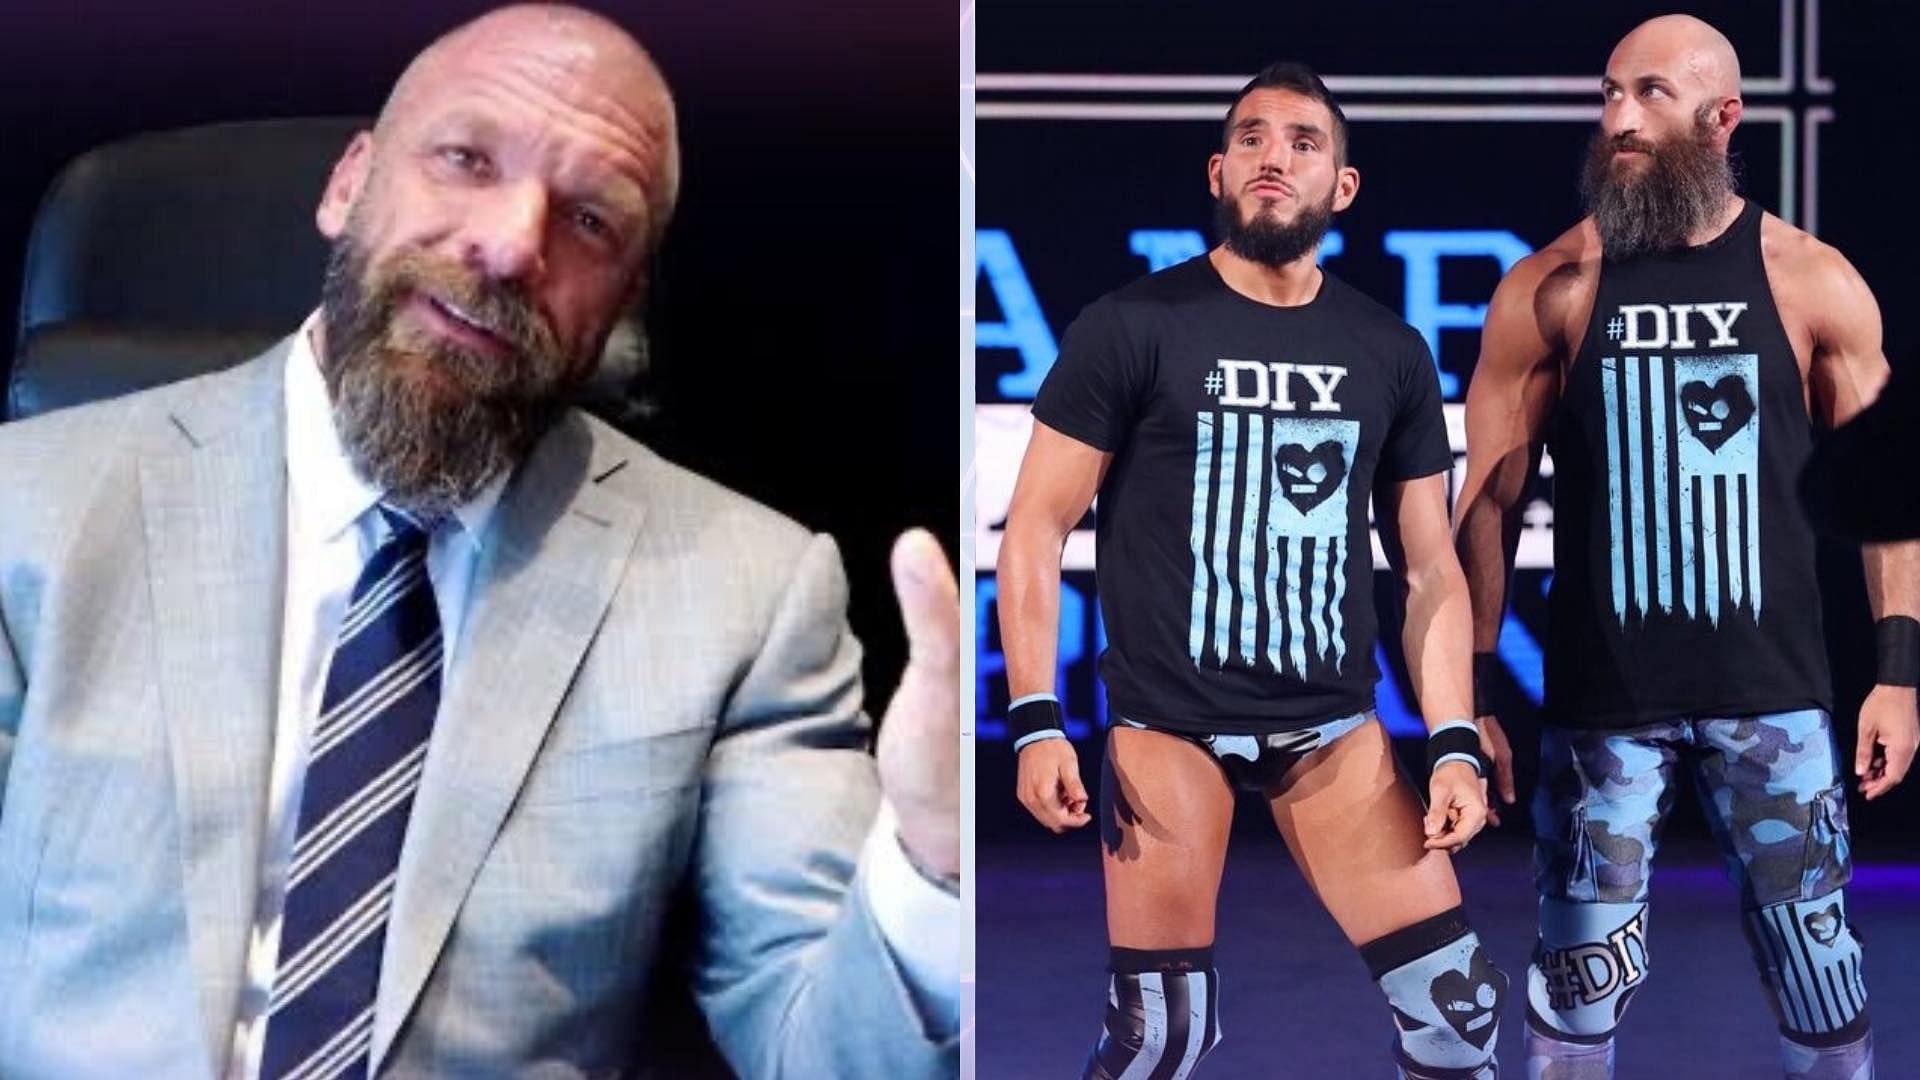 DIY surprisingly reunited on the most recent edition of WWE RAW